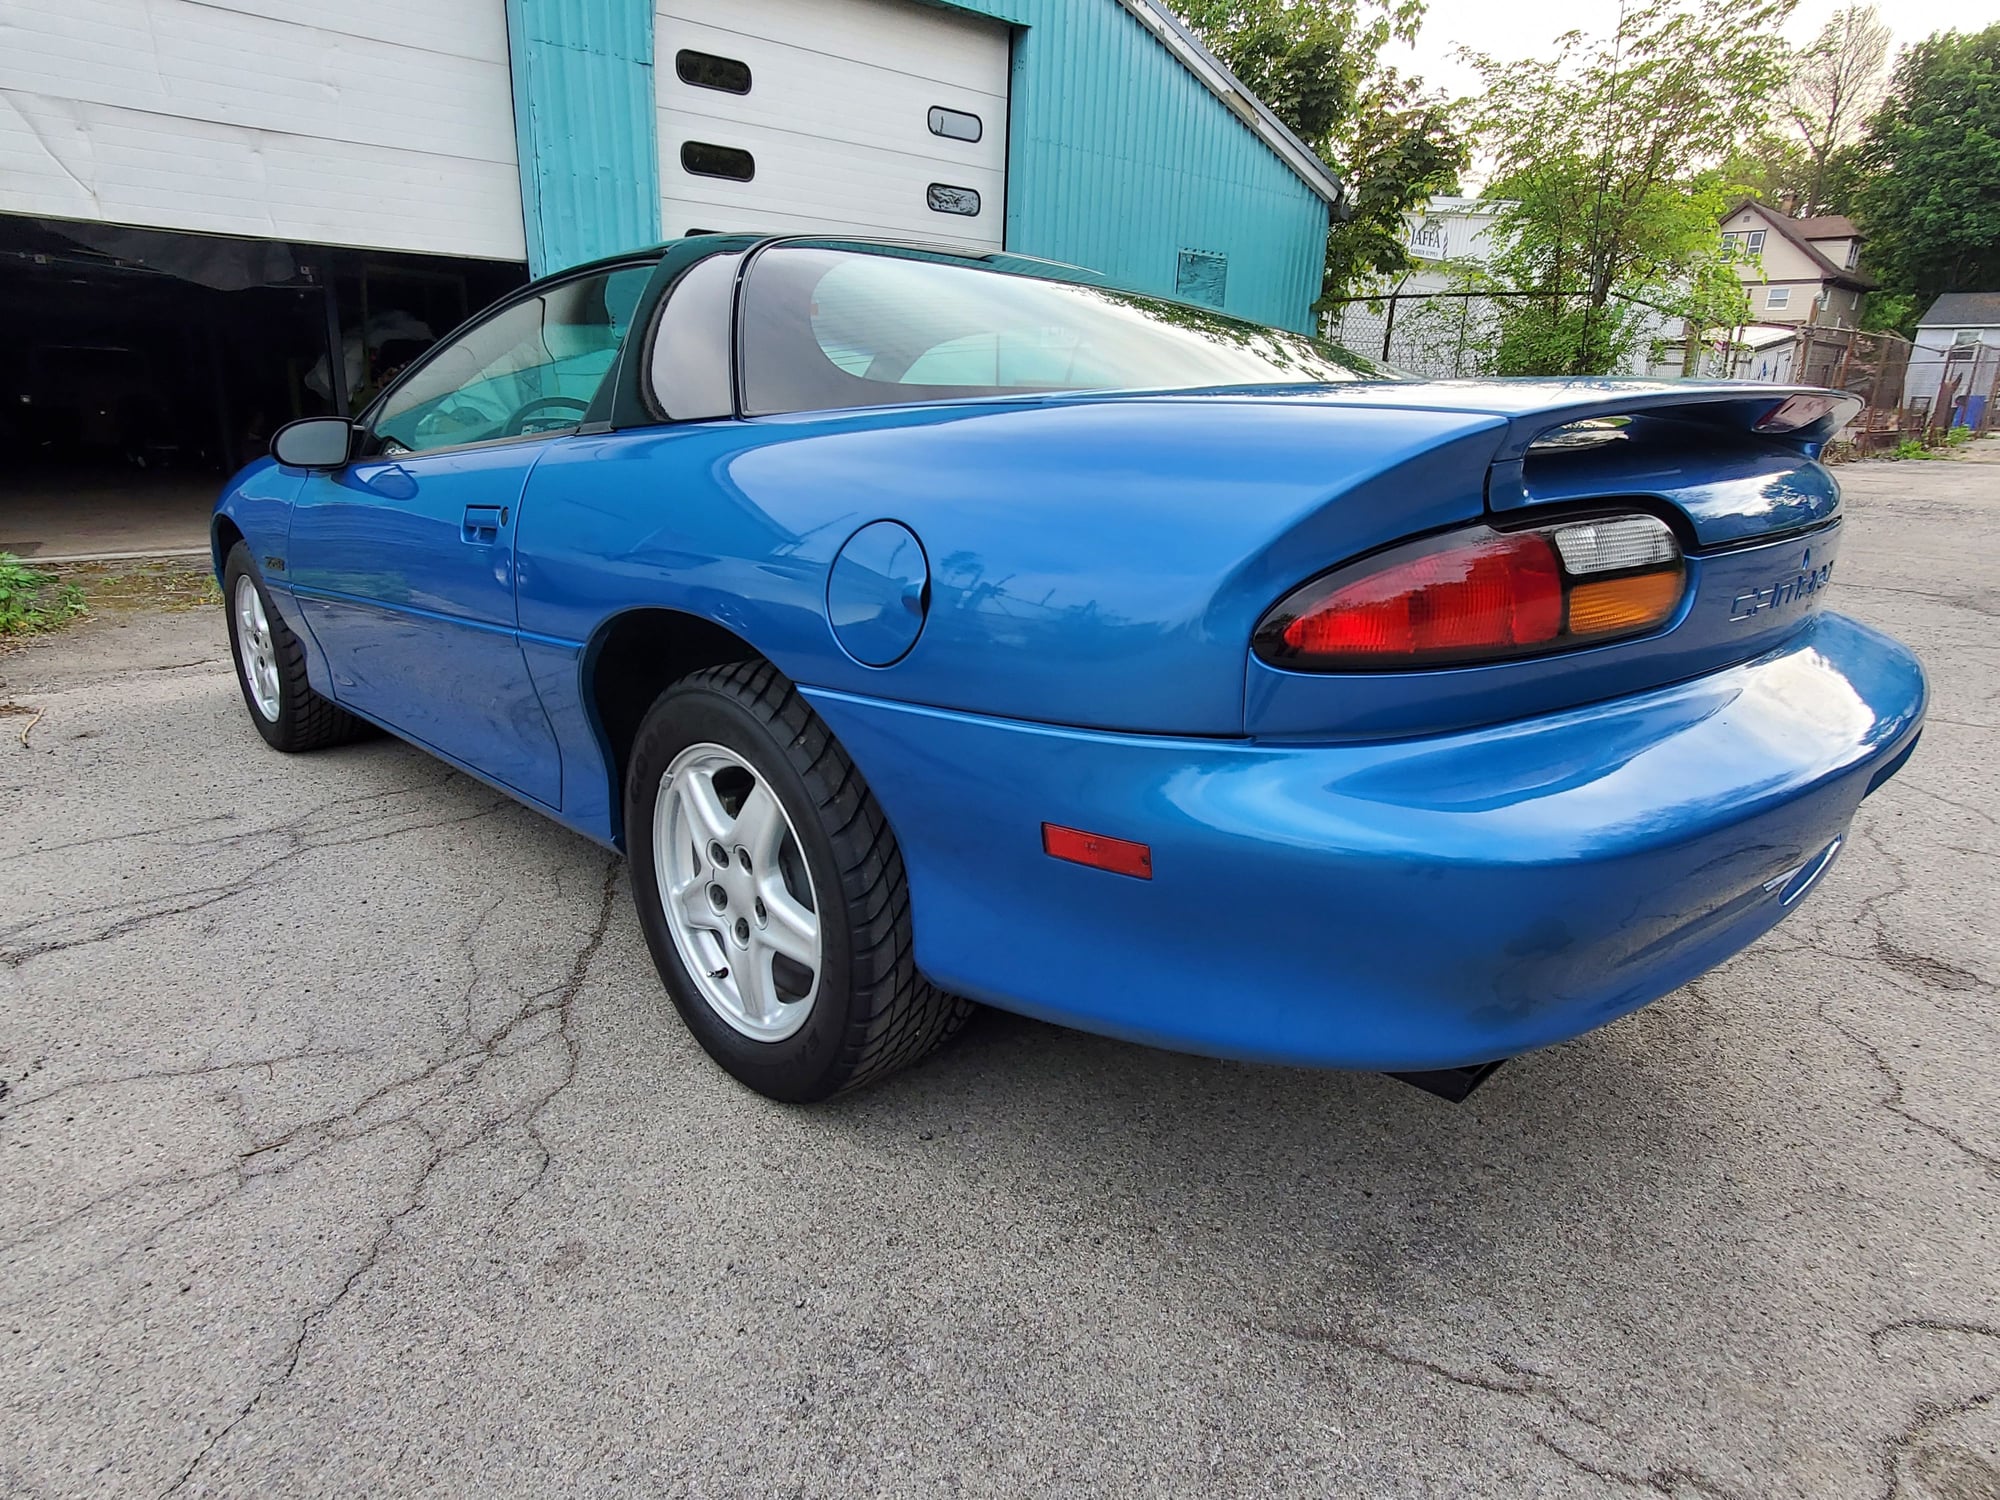 1999 Chevrolet Camaro - 1999 Camaro Z28 Hardtop 6 speed, only 2040 miles on it. - New - VIN 2G1FP22G5X2137514 - 2,040 Miles - 8 cyl - 2WD - Manual - Coupe - Blue - Webster, NY 14580, United States